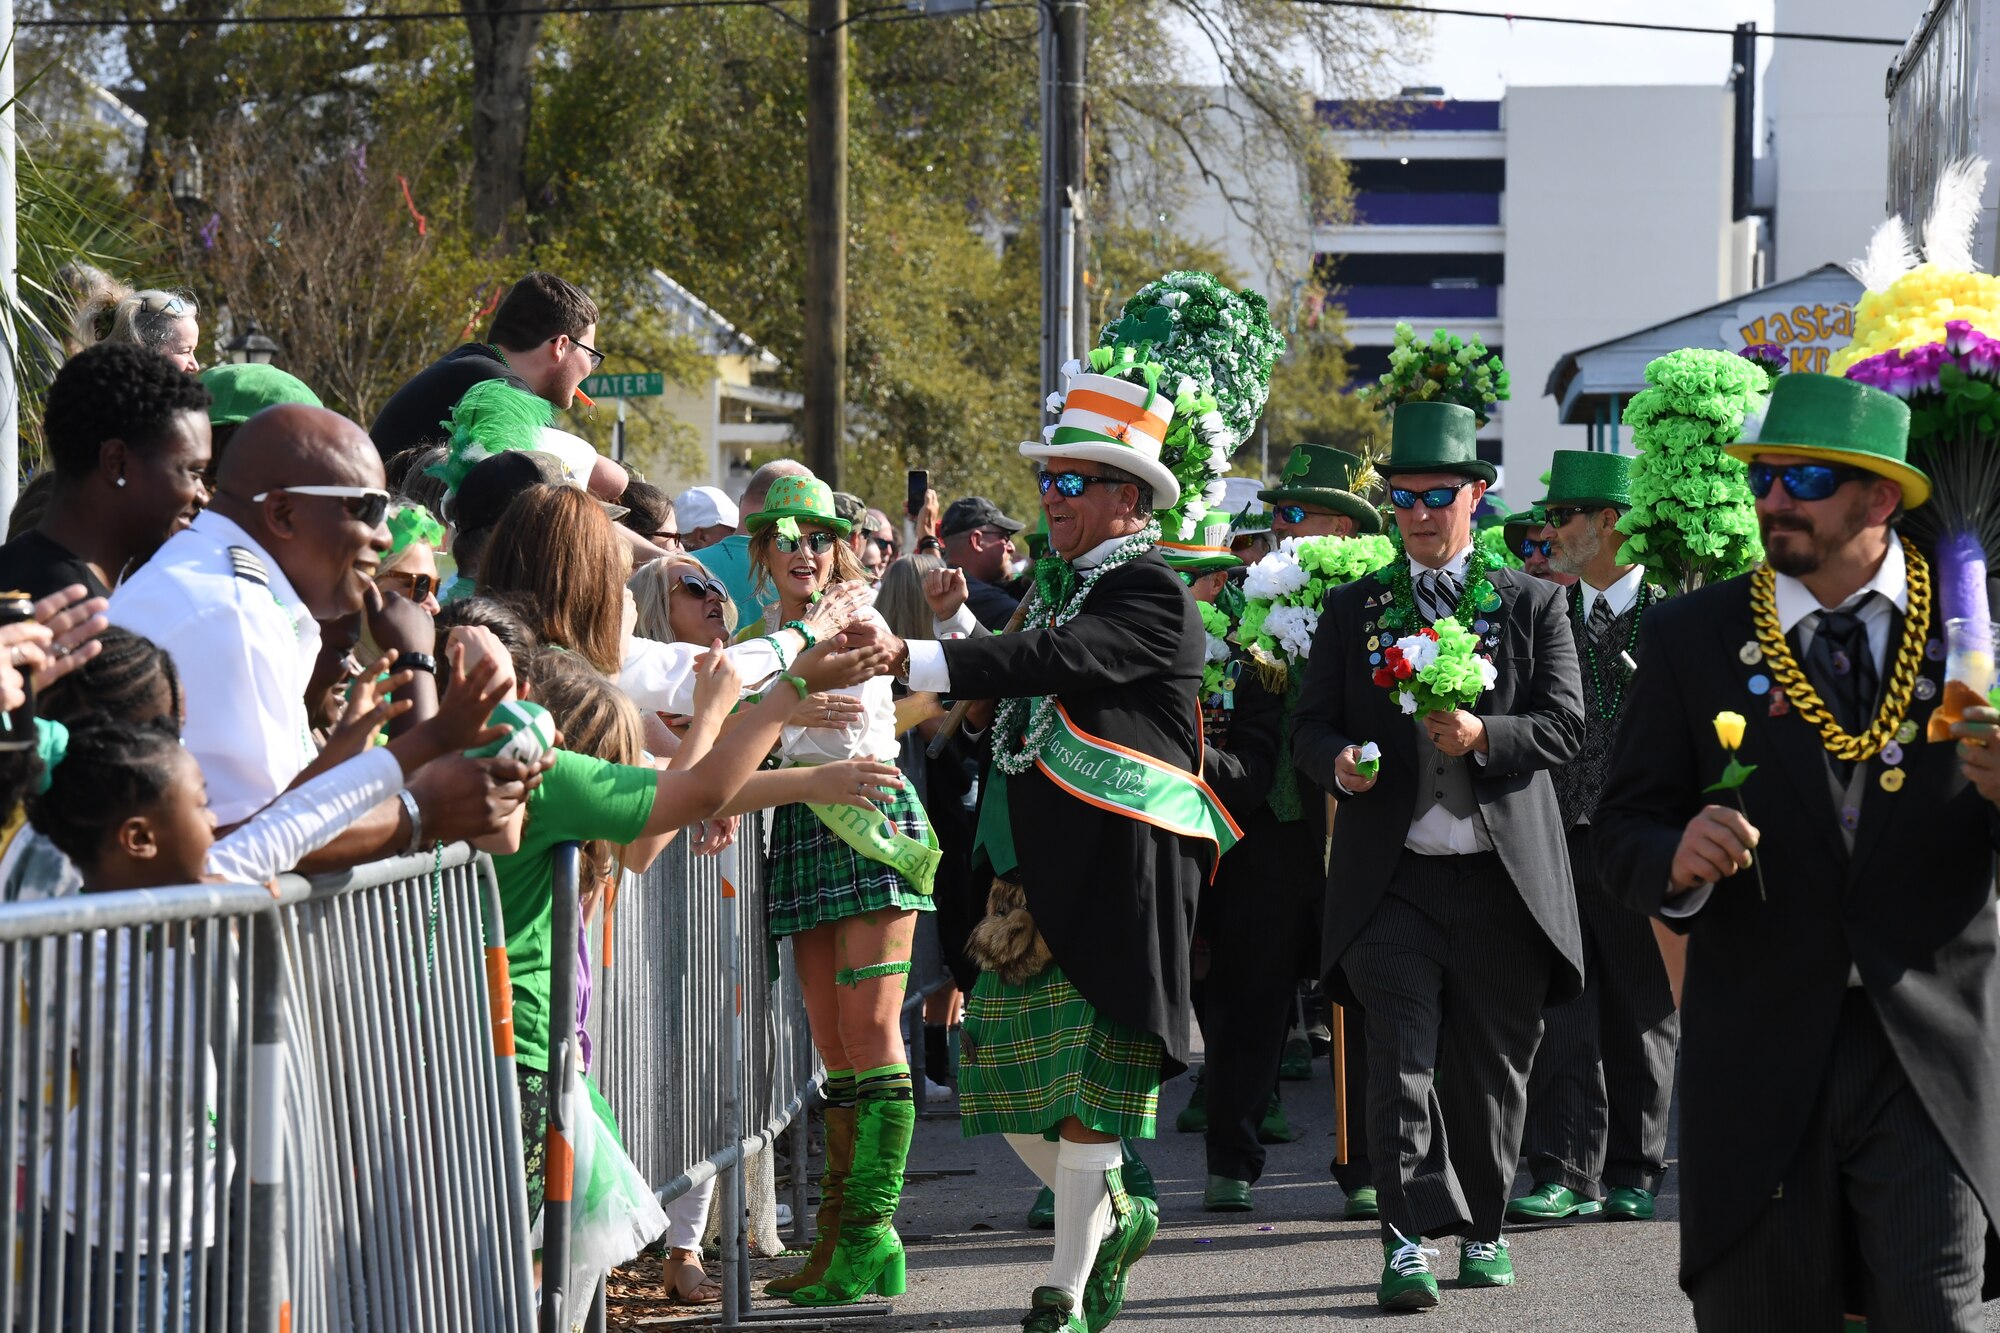 Members of the Ole Biloxi Marching Club participate in the Hibernia Marching Society of Mississippi St. Patrick's Day Parade in Biloxi, Mississippi, March 11, 2023.